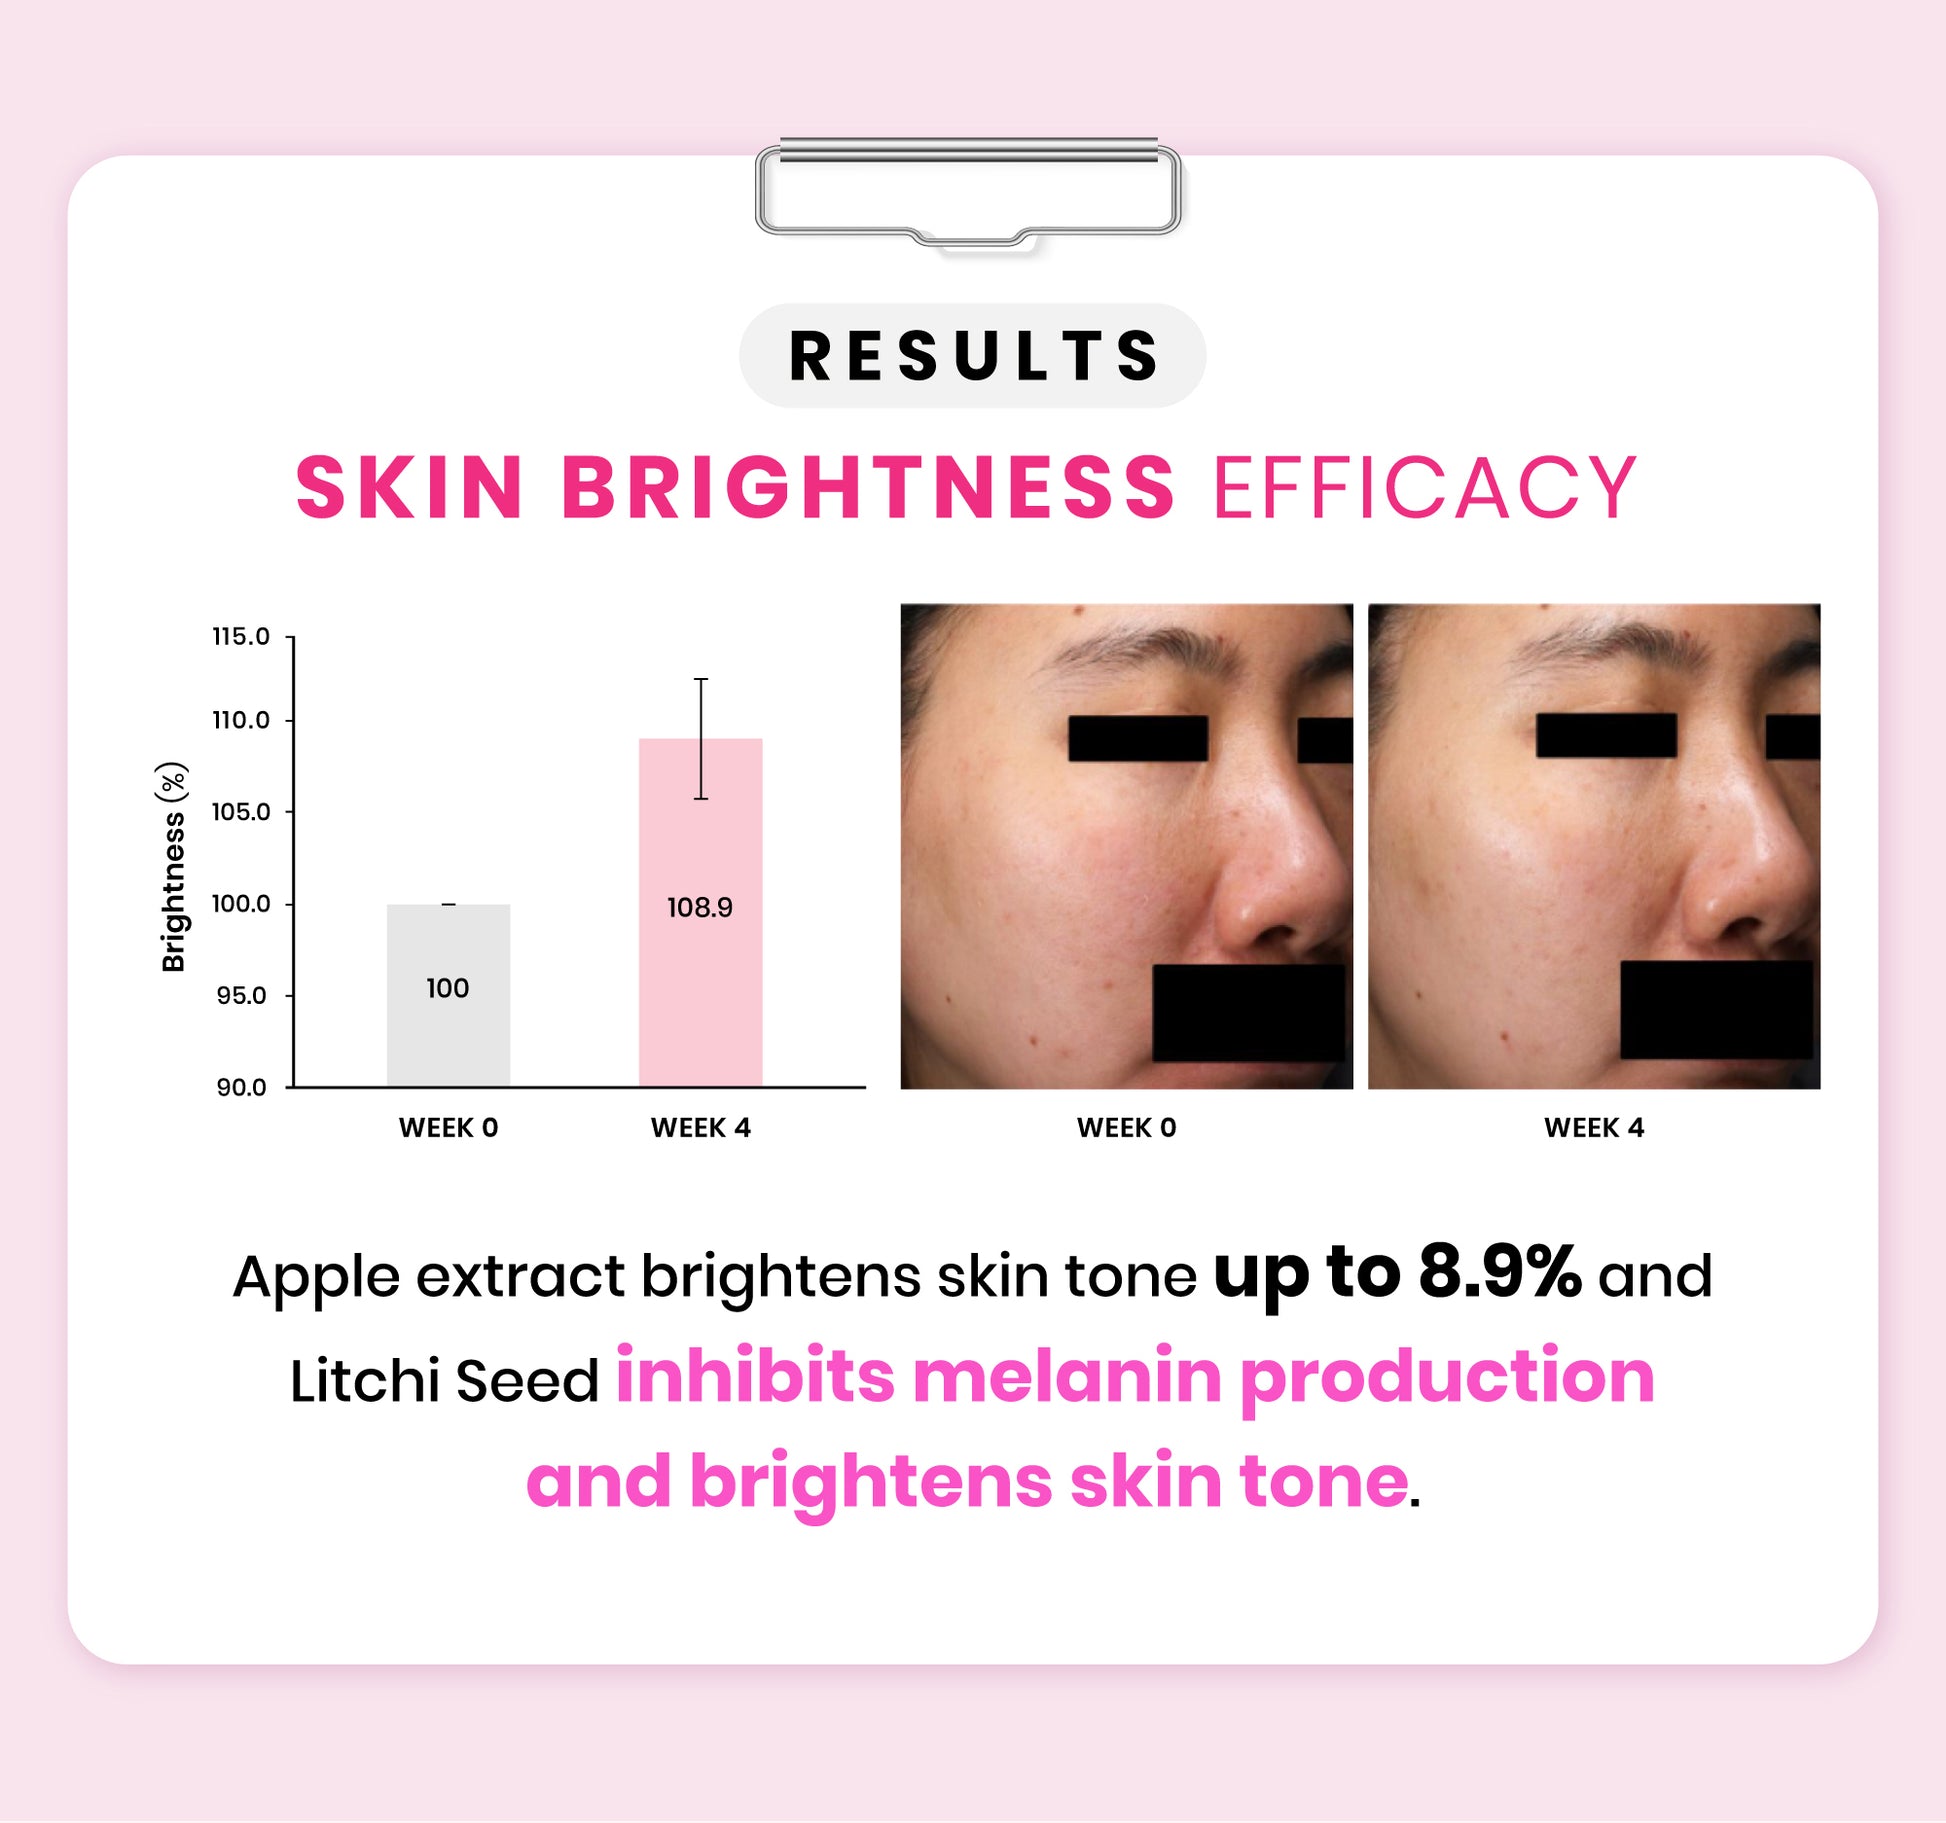 Avalon Stemcell Beauty Drink contains Apple extract that helps to brighten skin tone up to 8.9%. Besides, it contains Litchi seed in inhibiting the melanin production and brightening the skin tone.